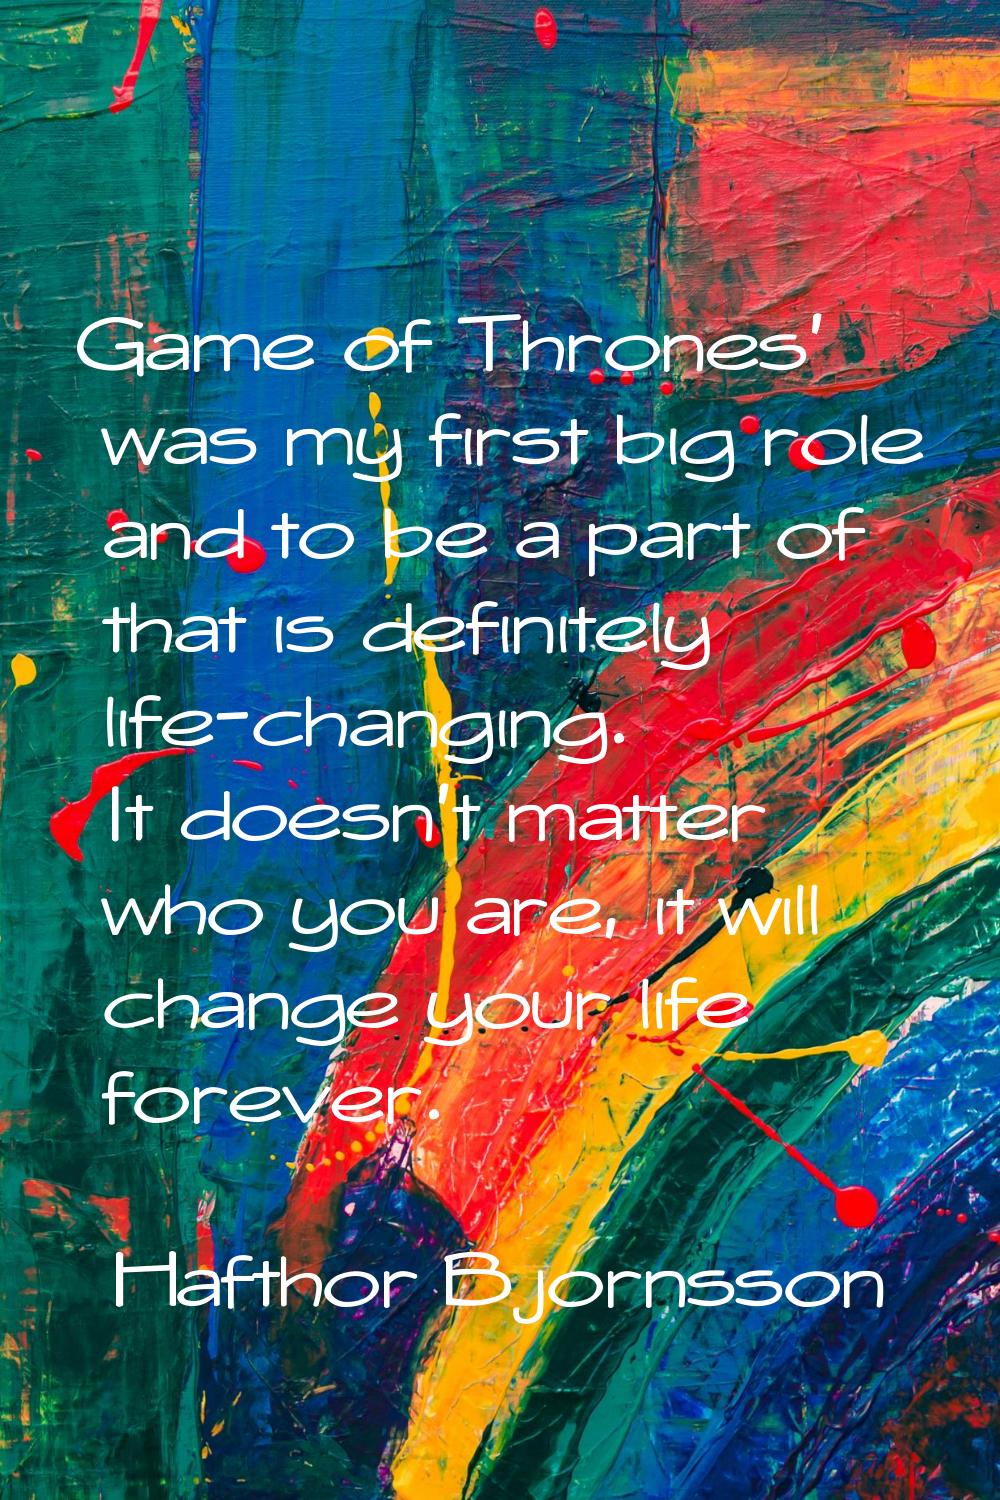 Game of Thrones' was my first big role and to be a part of that is definitely life-changing. It doe